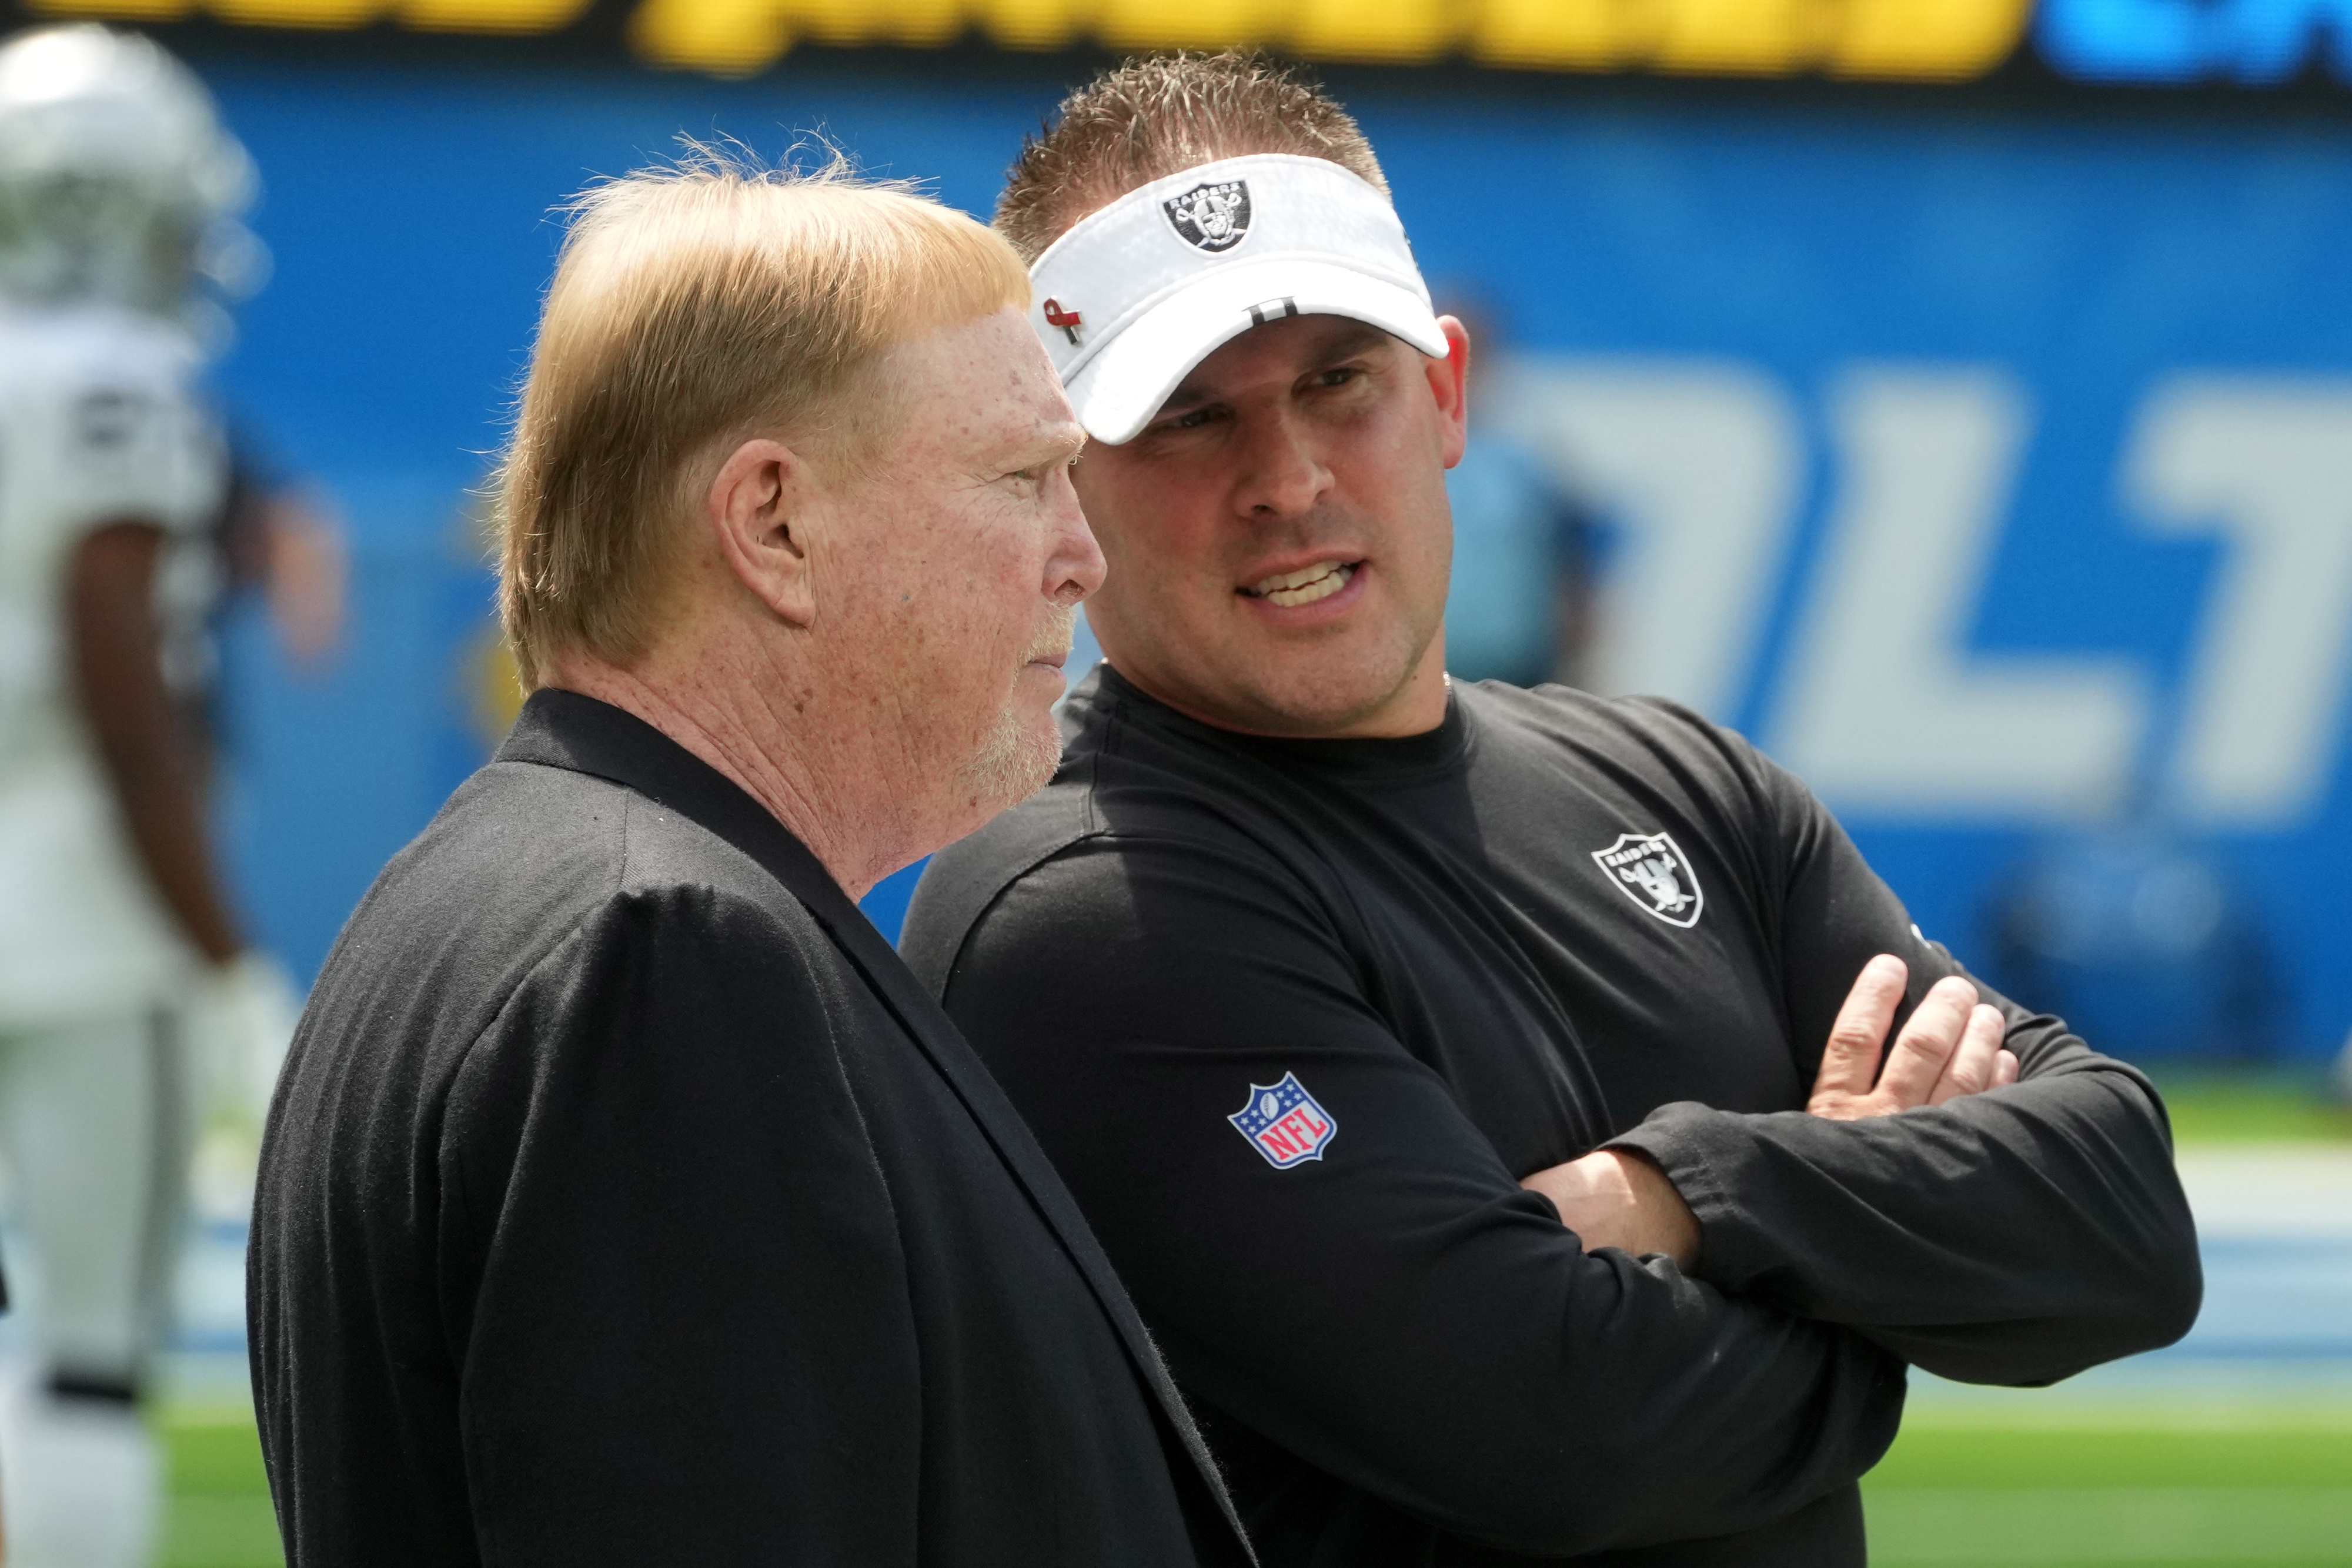 Raiders owner Mark Davis fired coach Josh McDaniels late Tuesday afternoon, 21 months after he hired him and GM Dave Ziegler to run the franchise after Jon Gruden was dismissed.